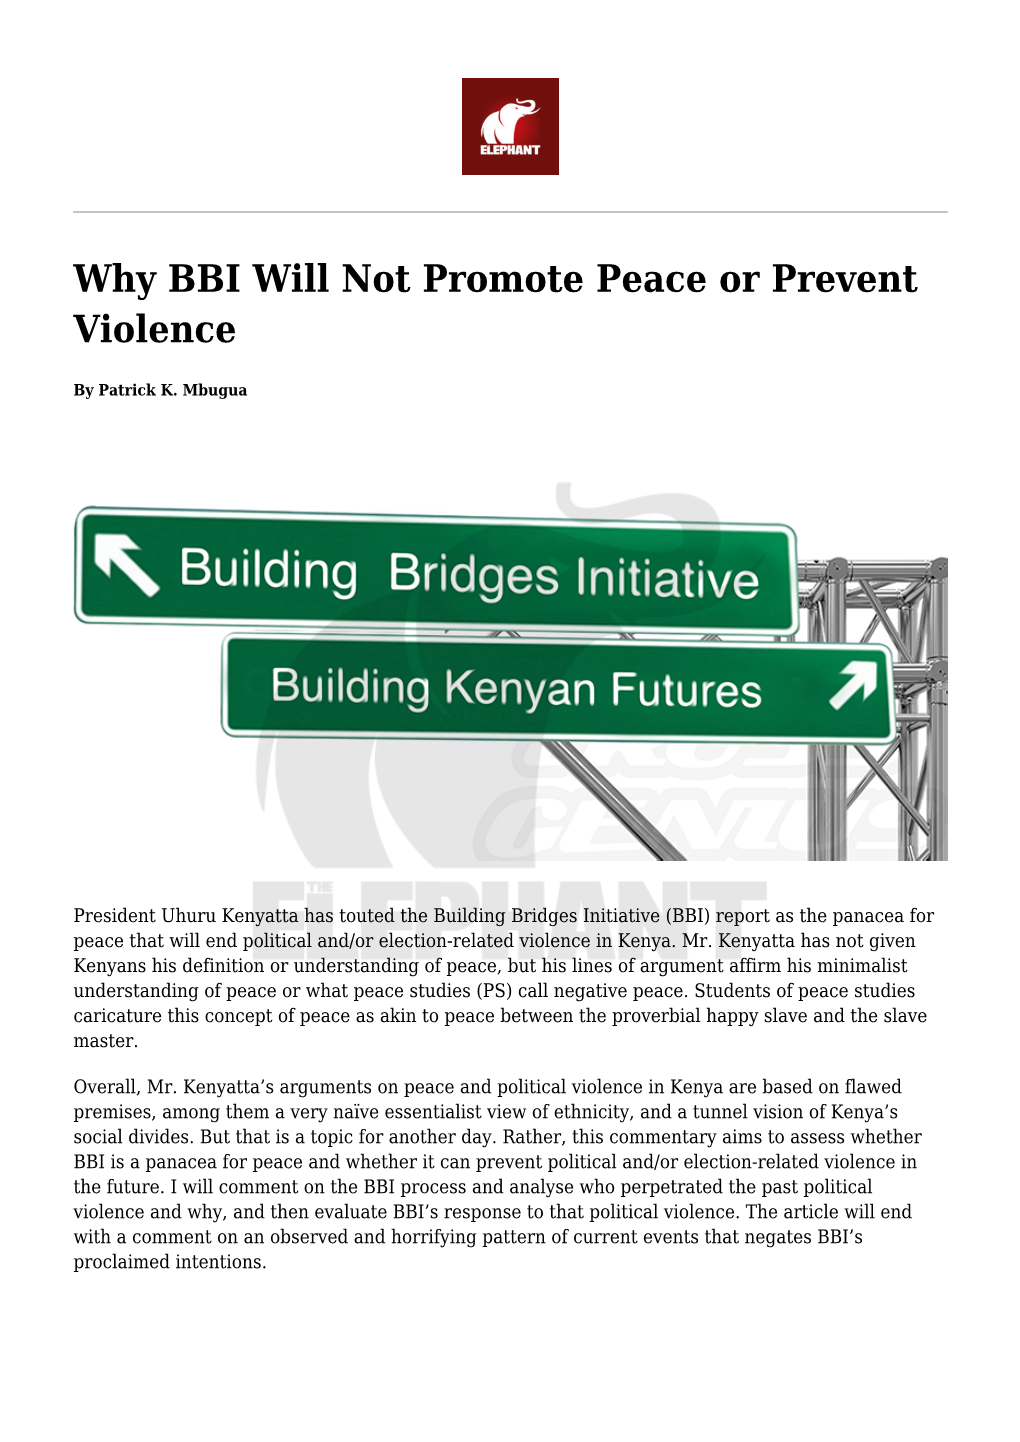 Why BBI Will Not Promote Peace Or Prevent Violence